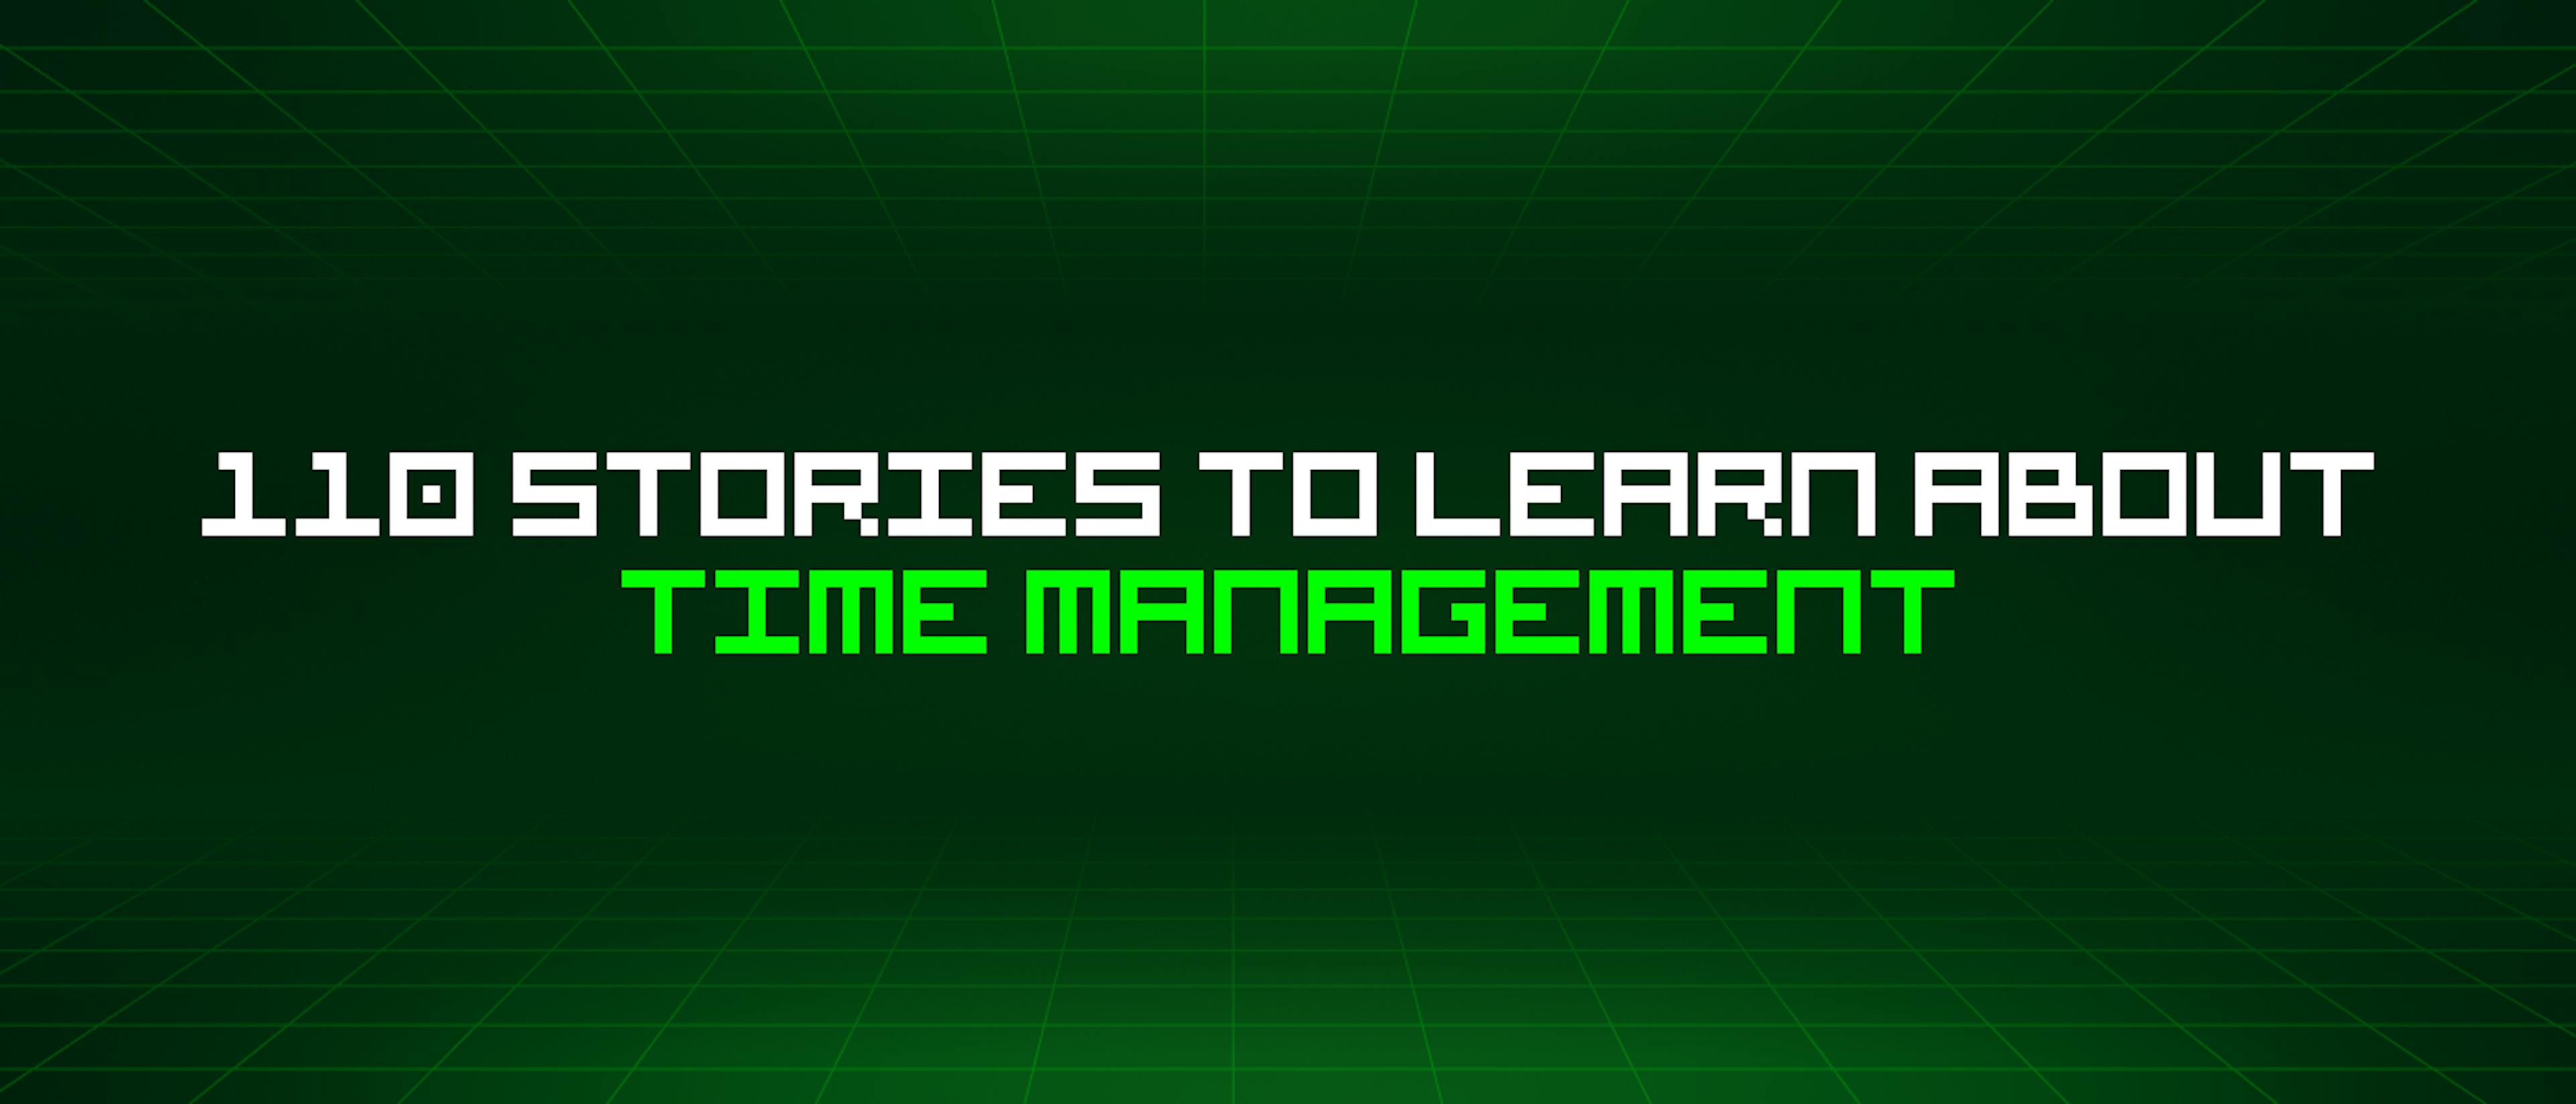 featured image - 110 Stories To Learn About Time Management